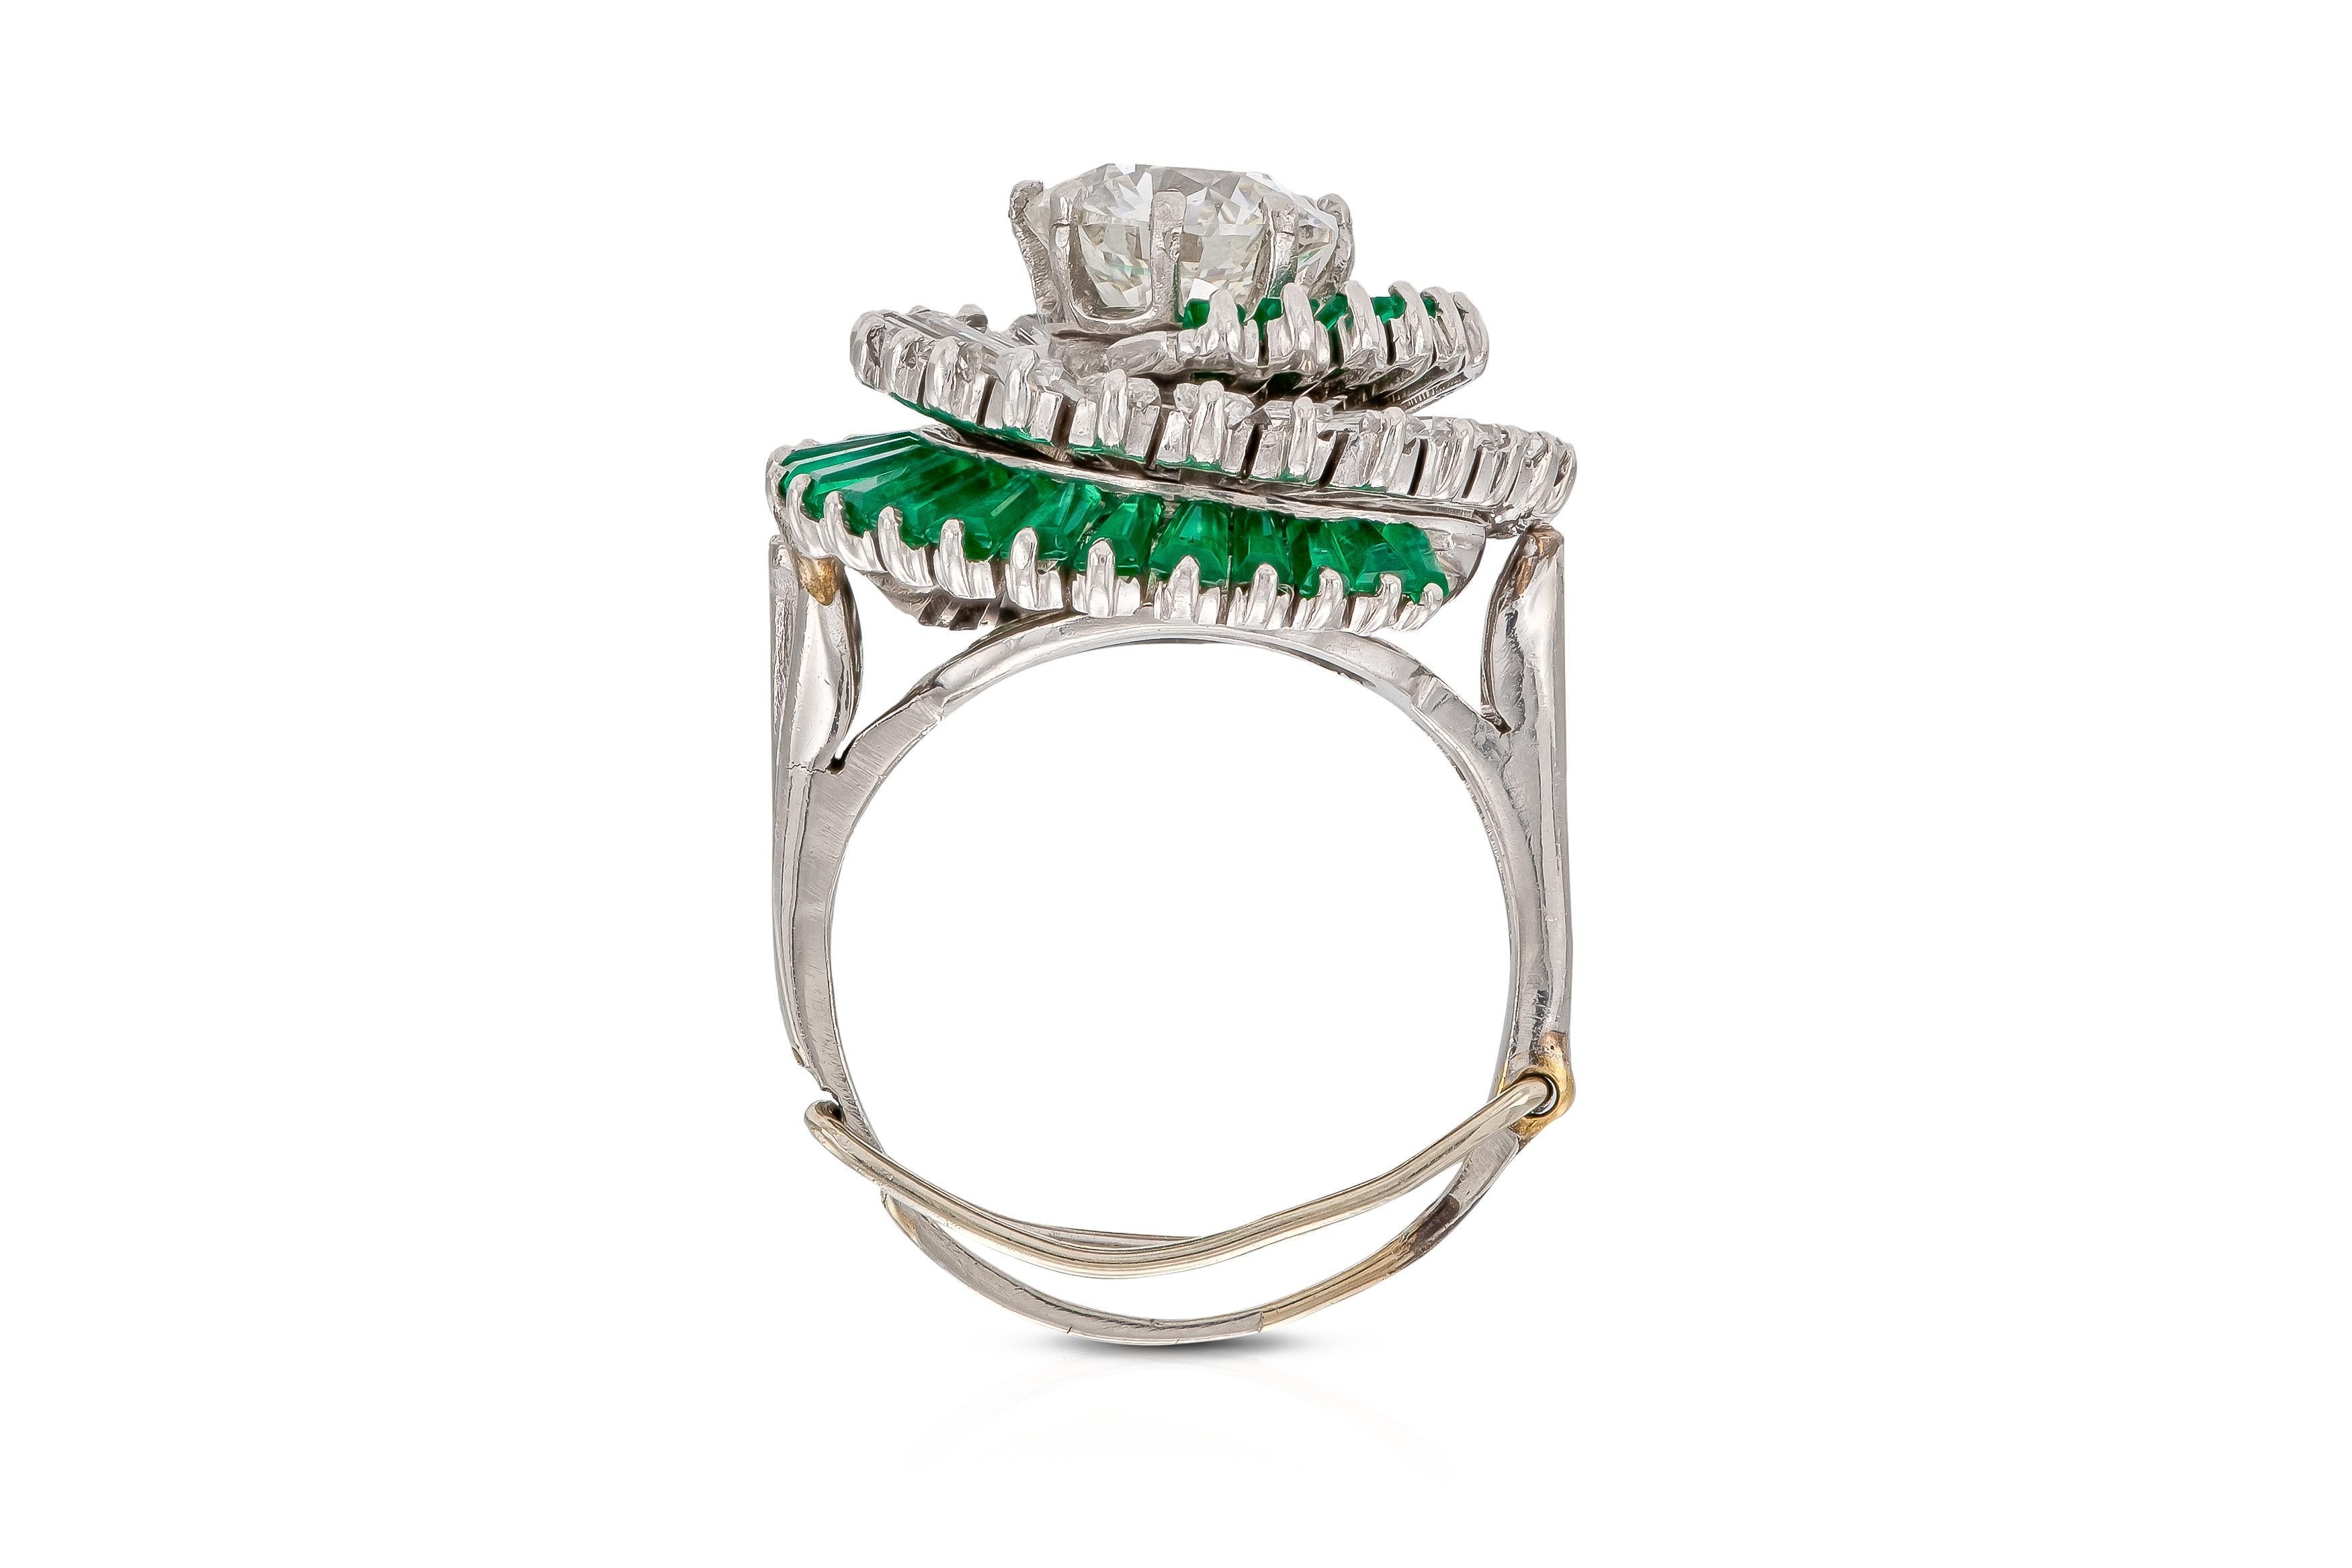 Vintage 1950s 1.52 Carat Diamond Ring with Emerald and Diamond Swirl Setting In Good Condition For Sale In New York, NY